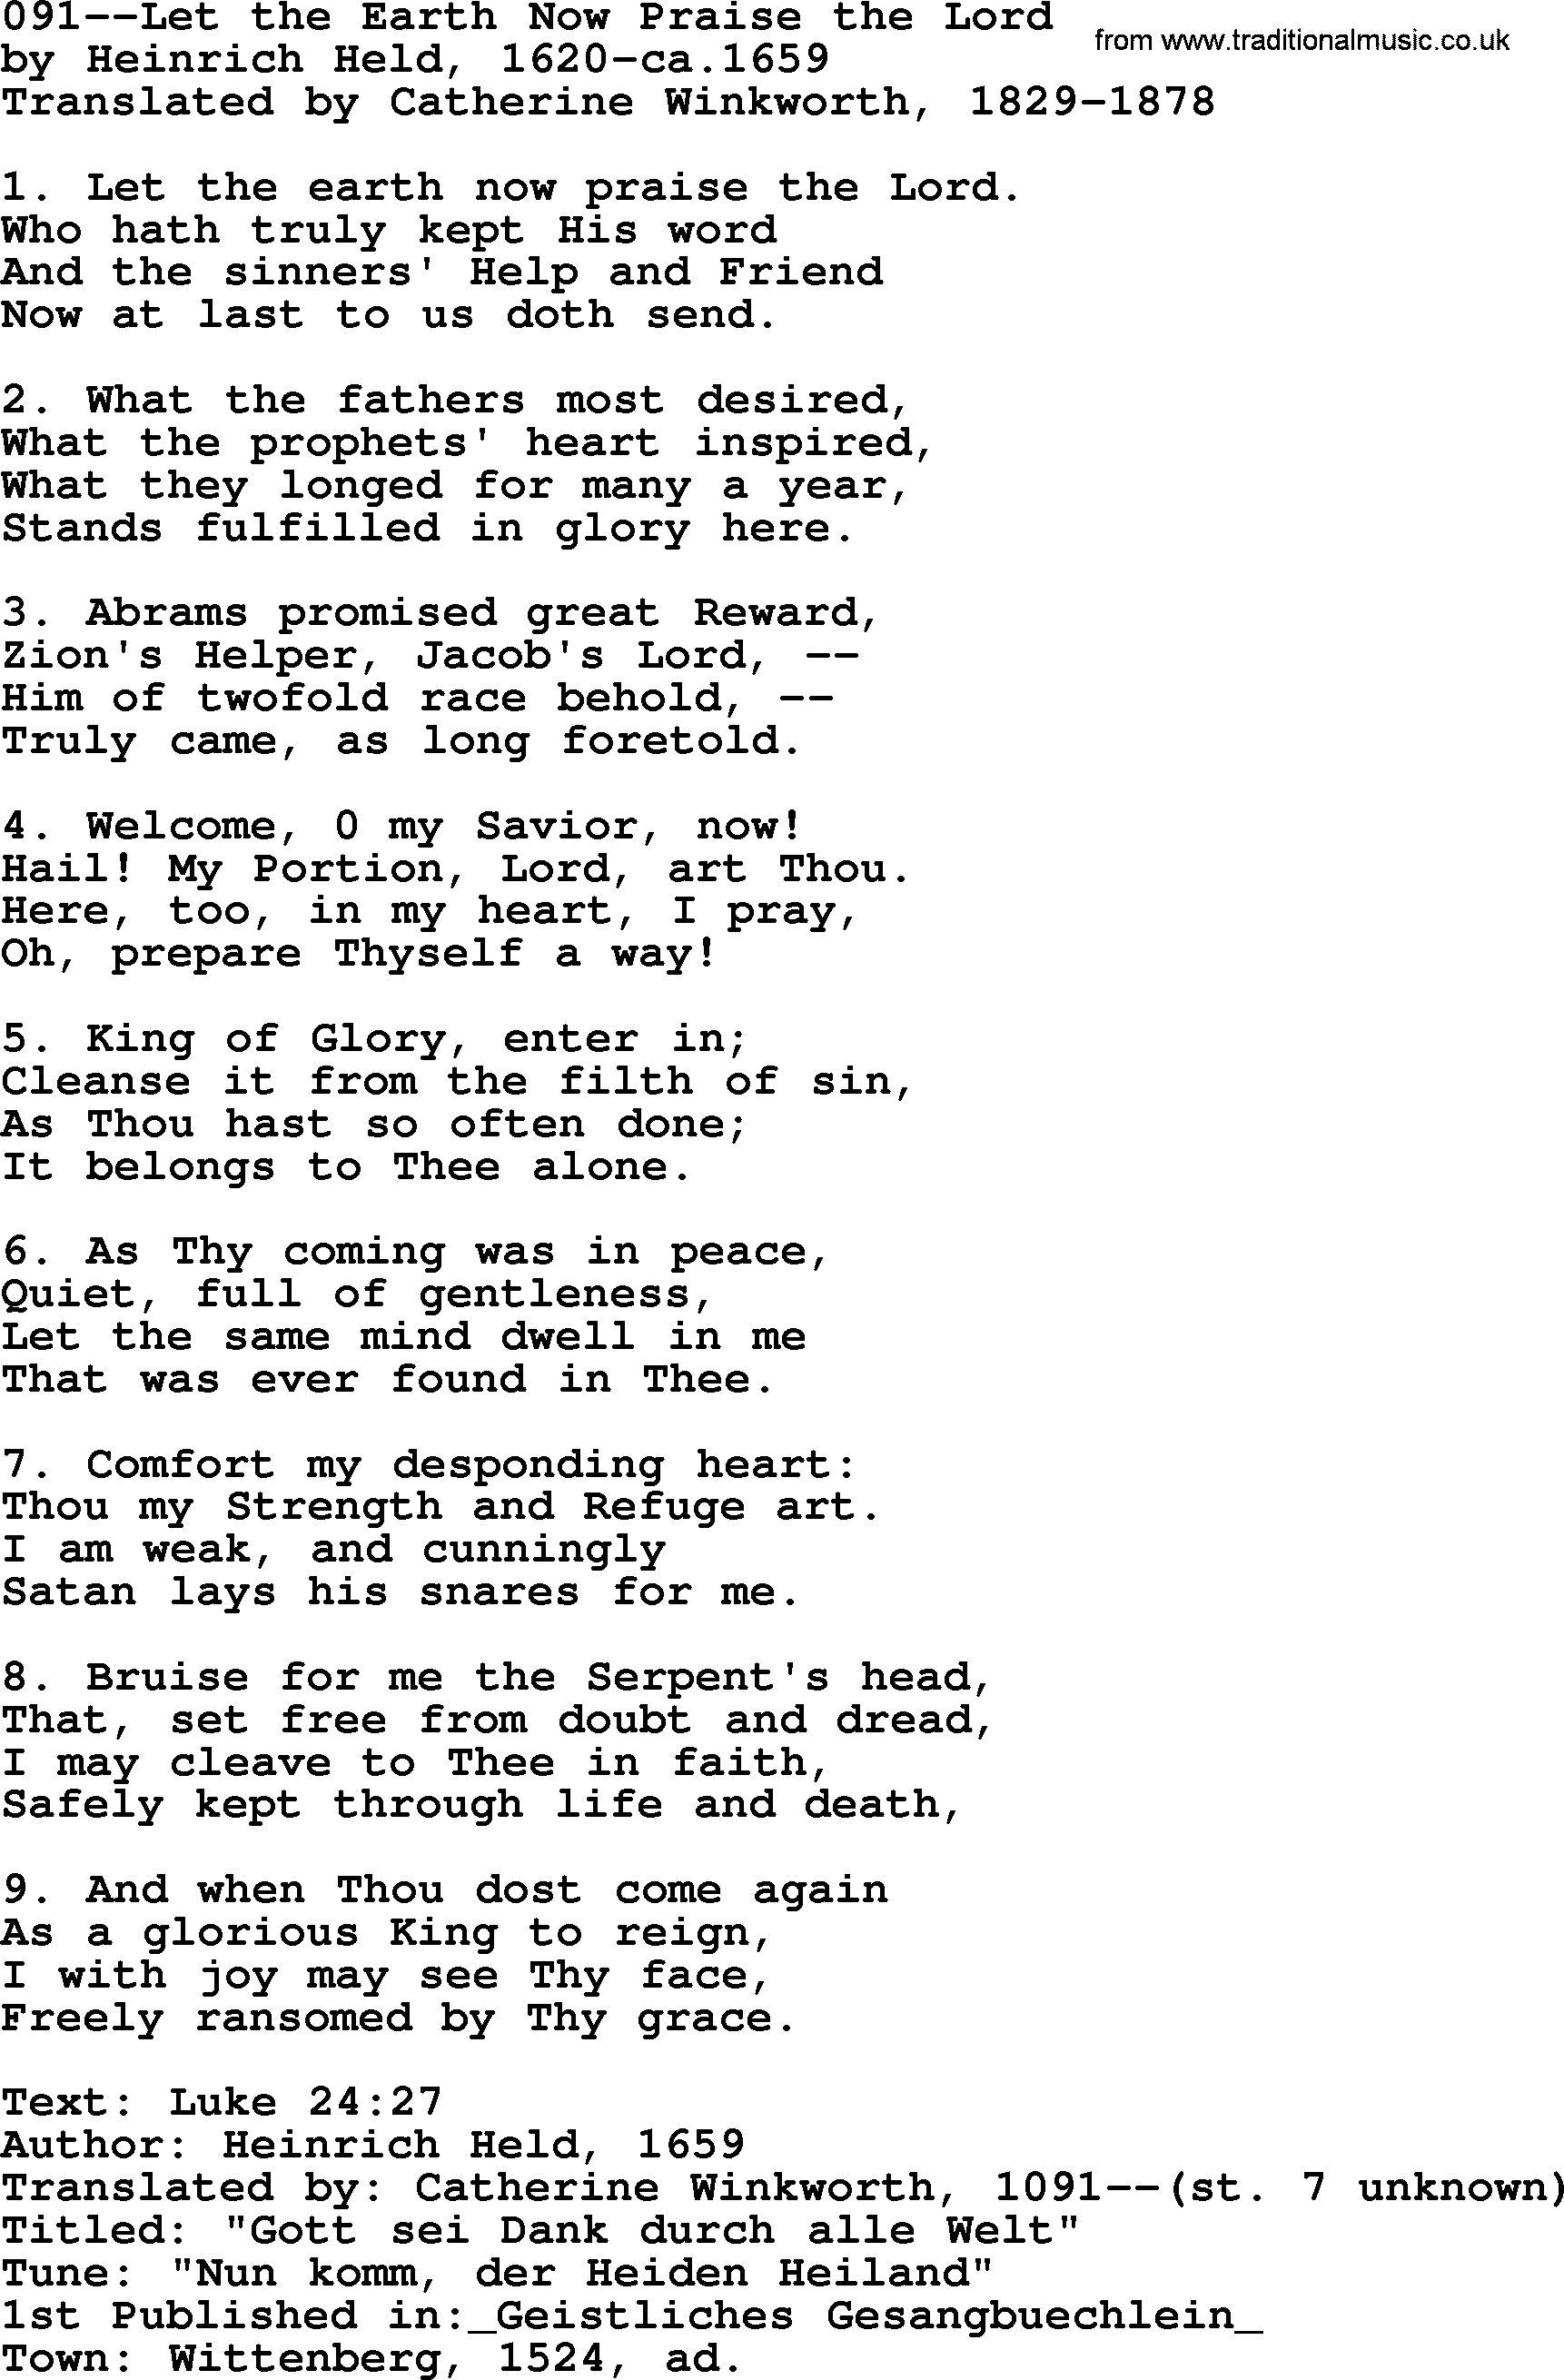 Lutheran Hymn: 091--Let the Earth Now Praise the Lord.txt lyrics with PDF